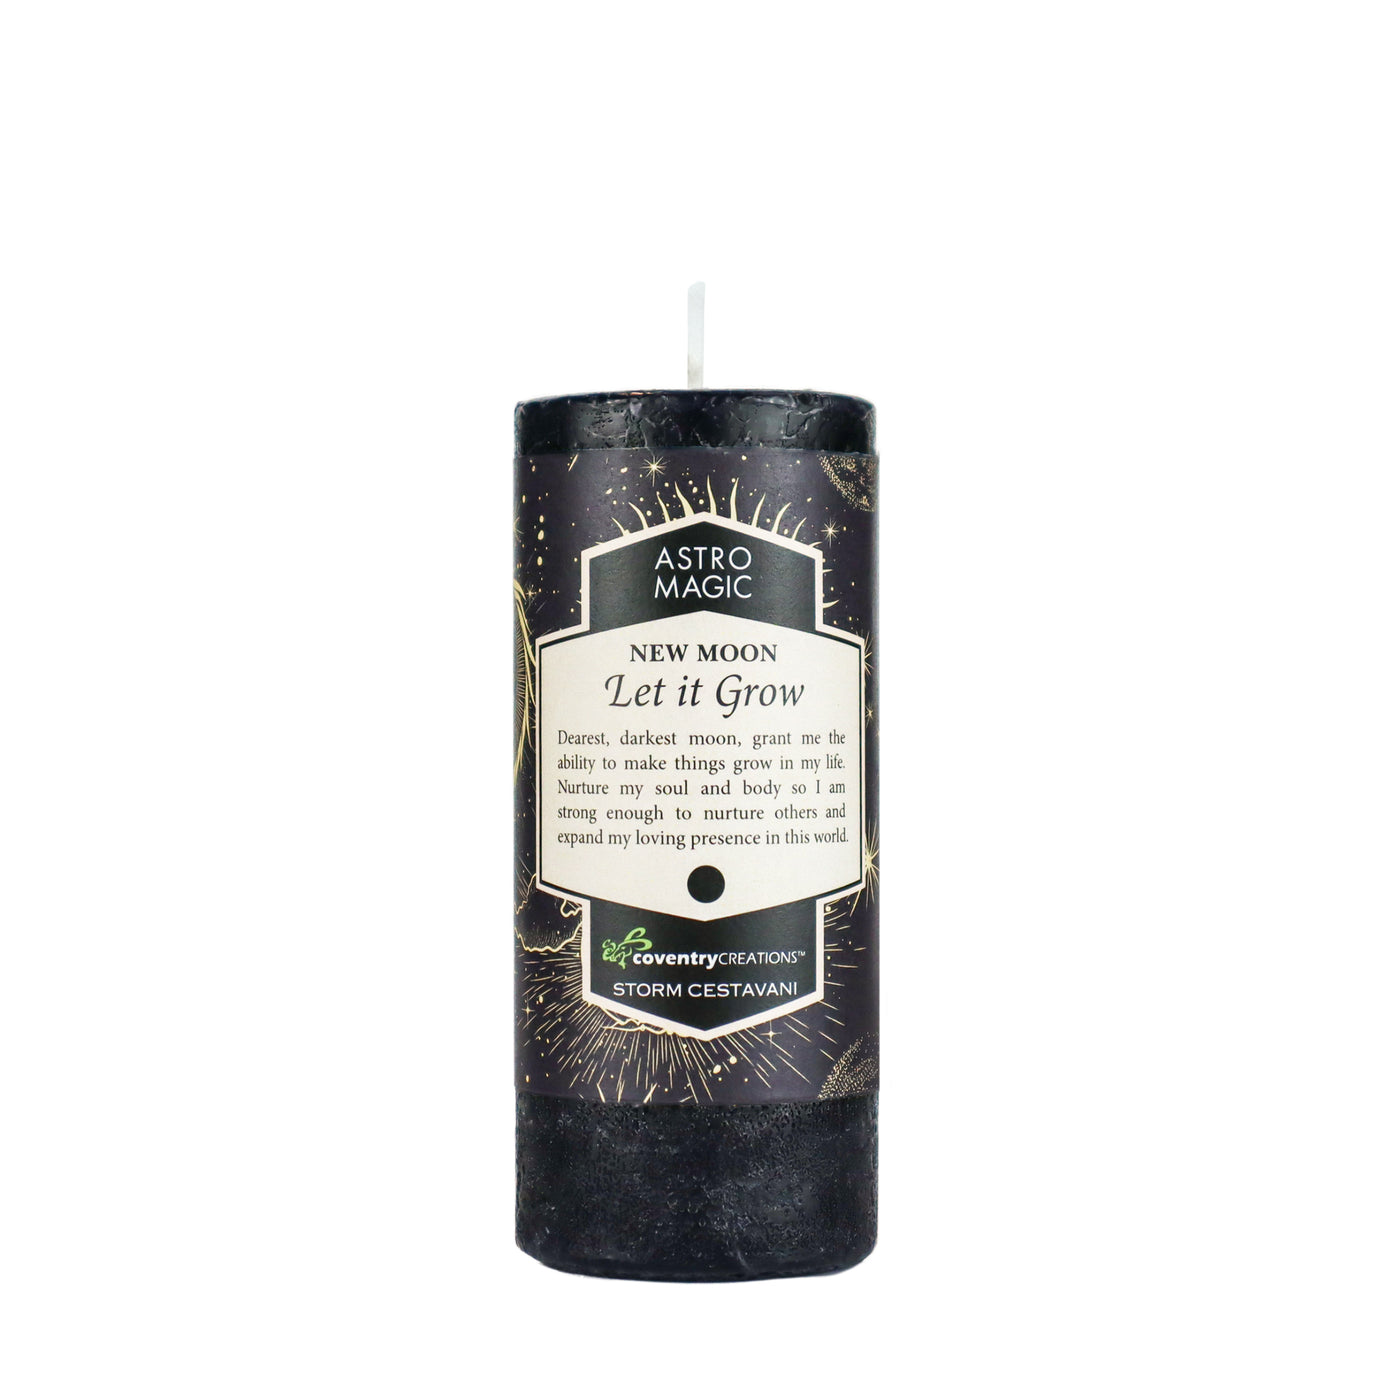 Coventry Creations Astro Magic New Moon- Let It Grow Black candle 